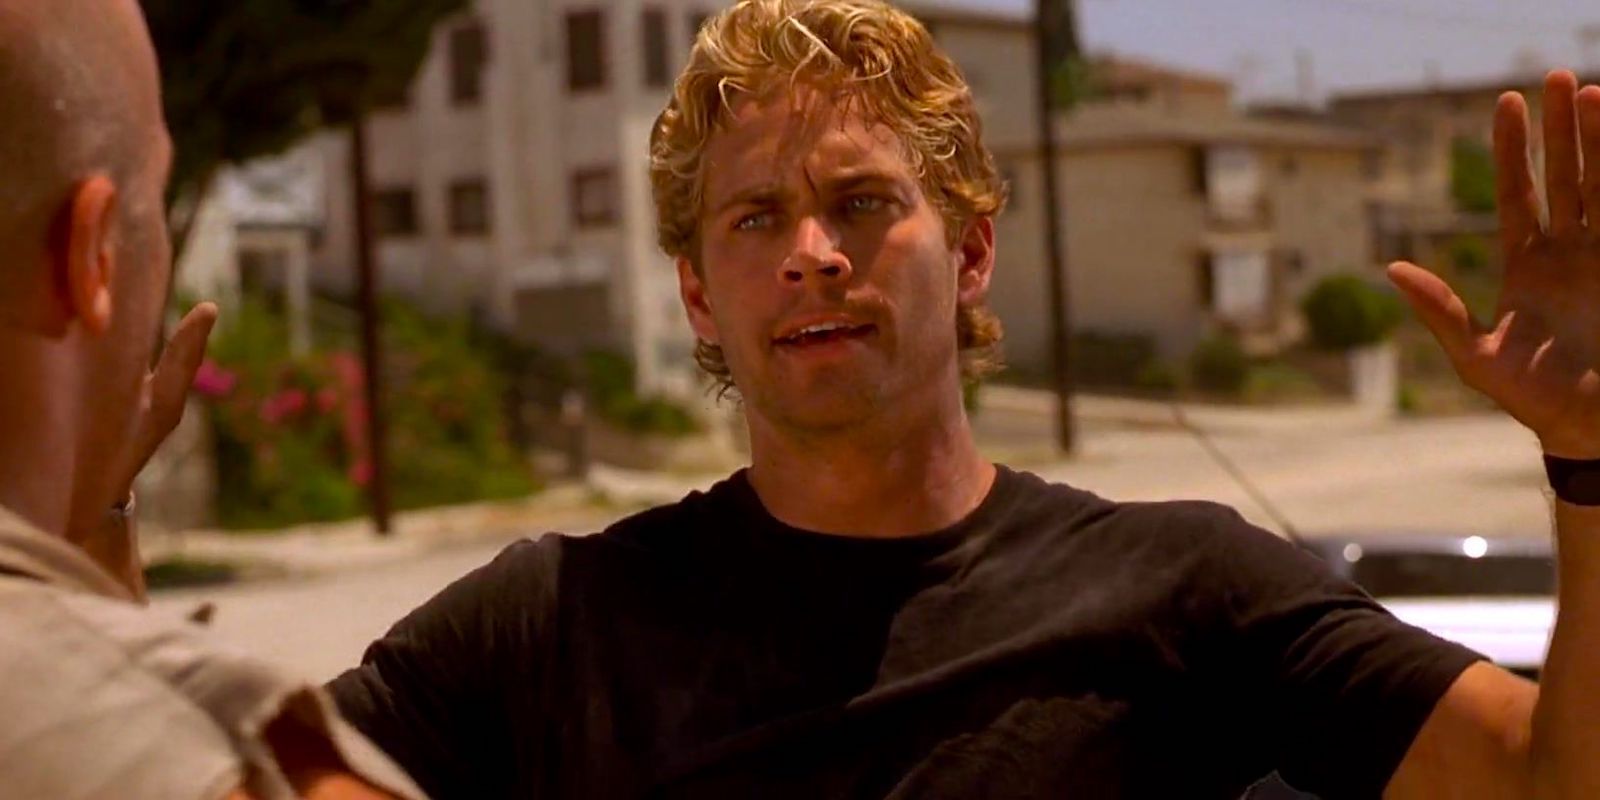 Paul Walker as Brian Holding Up His Hands in the original The Fast and the Furious